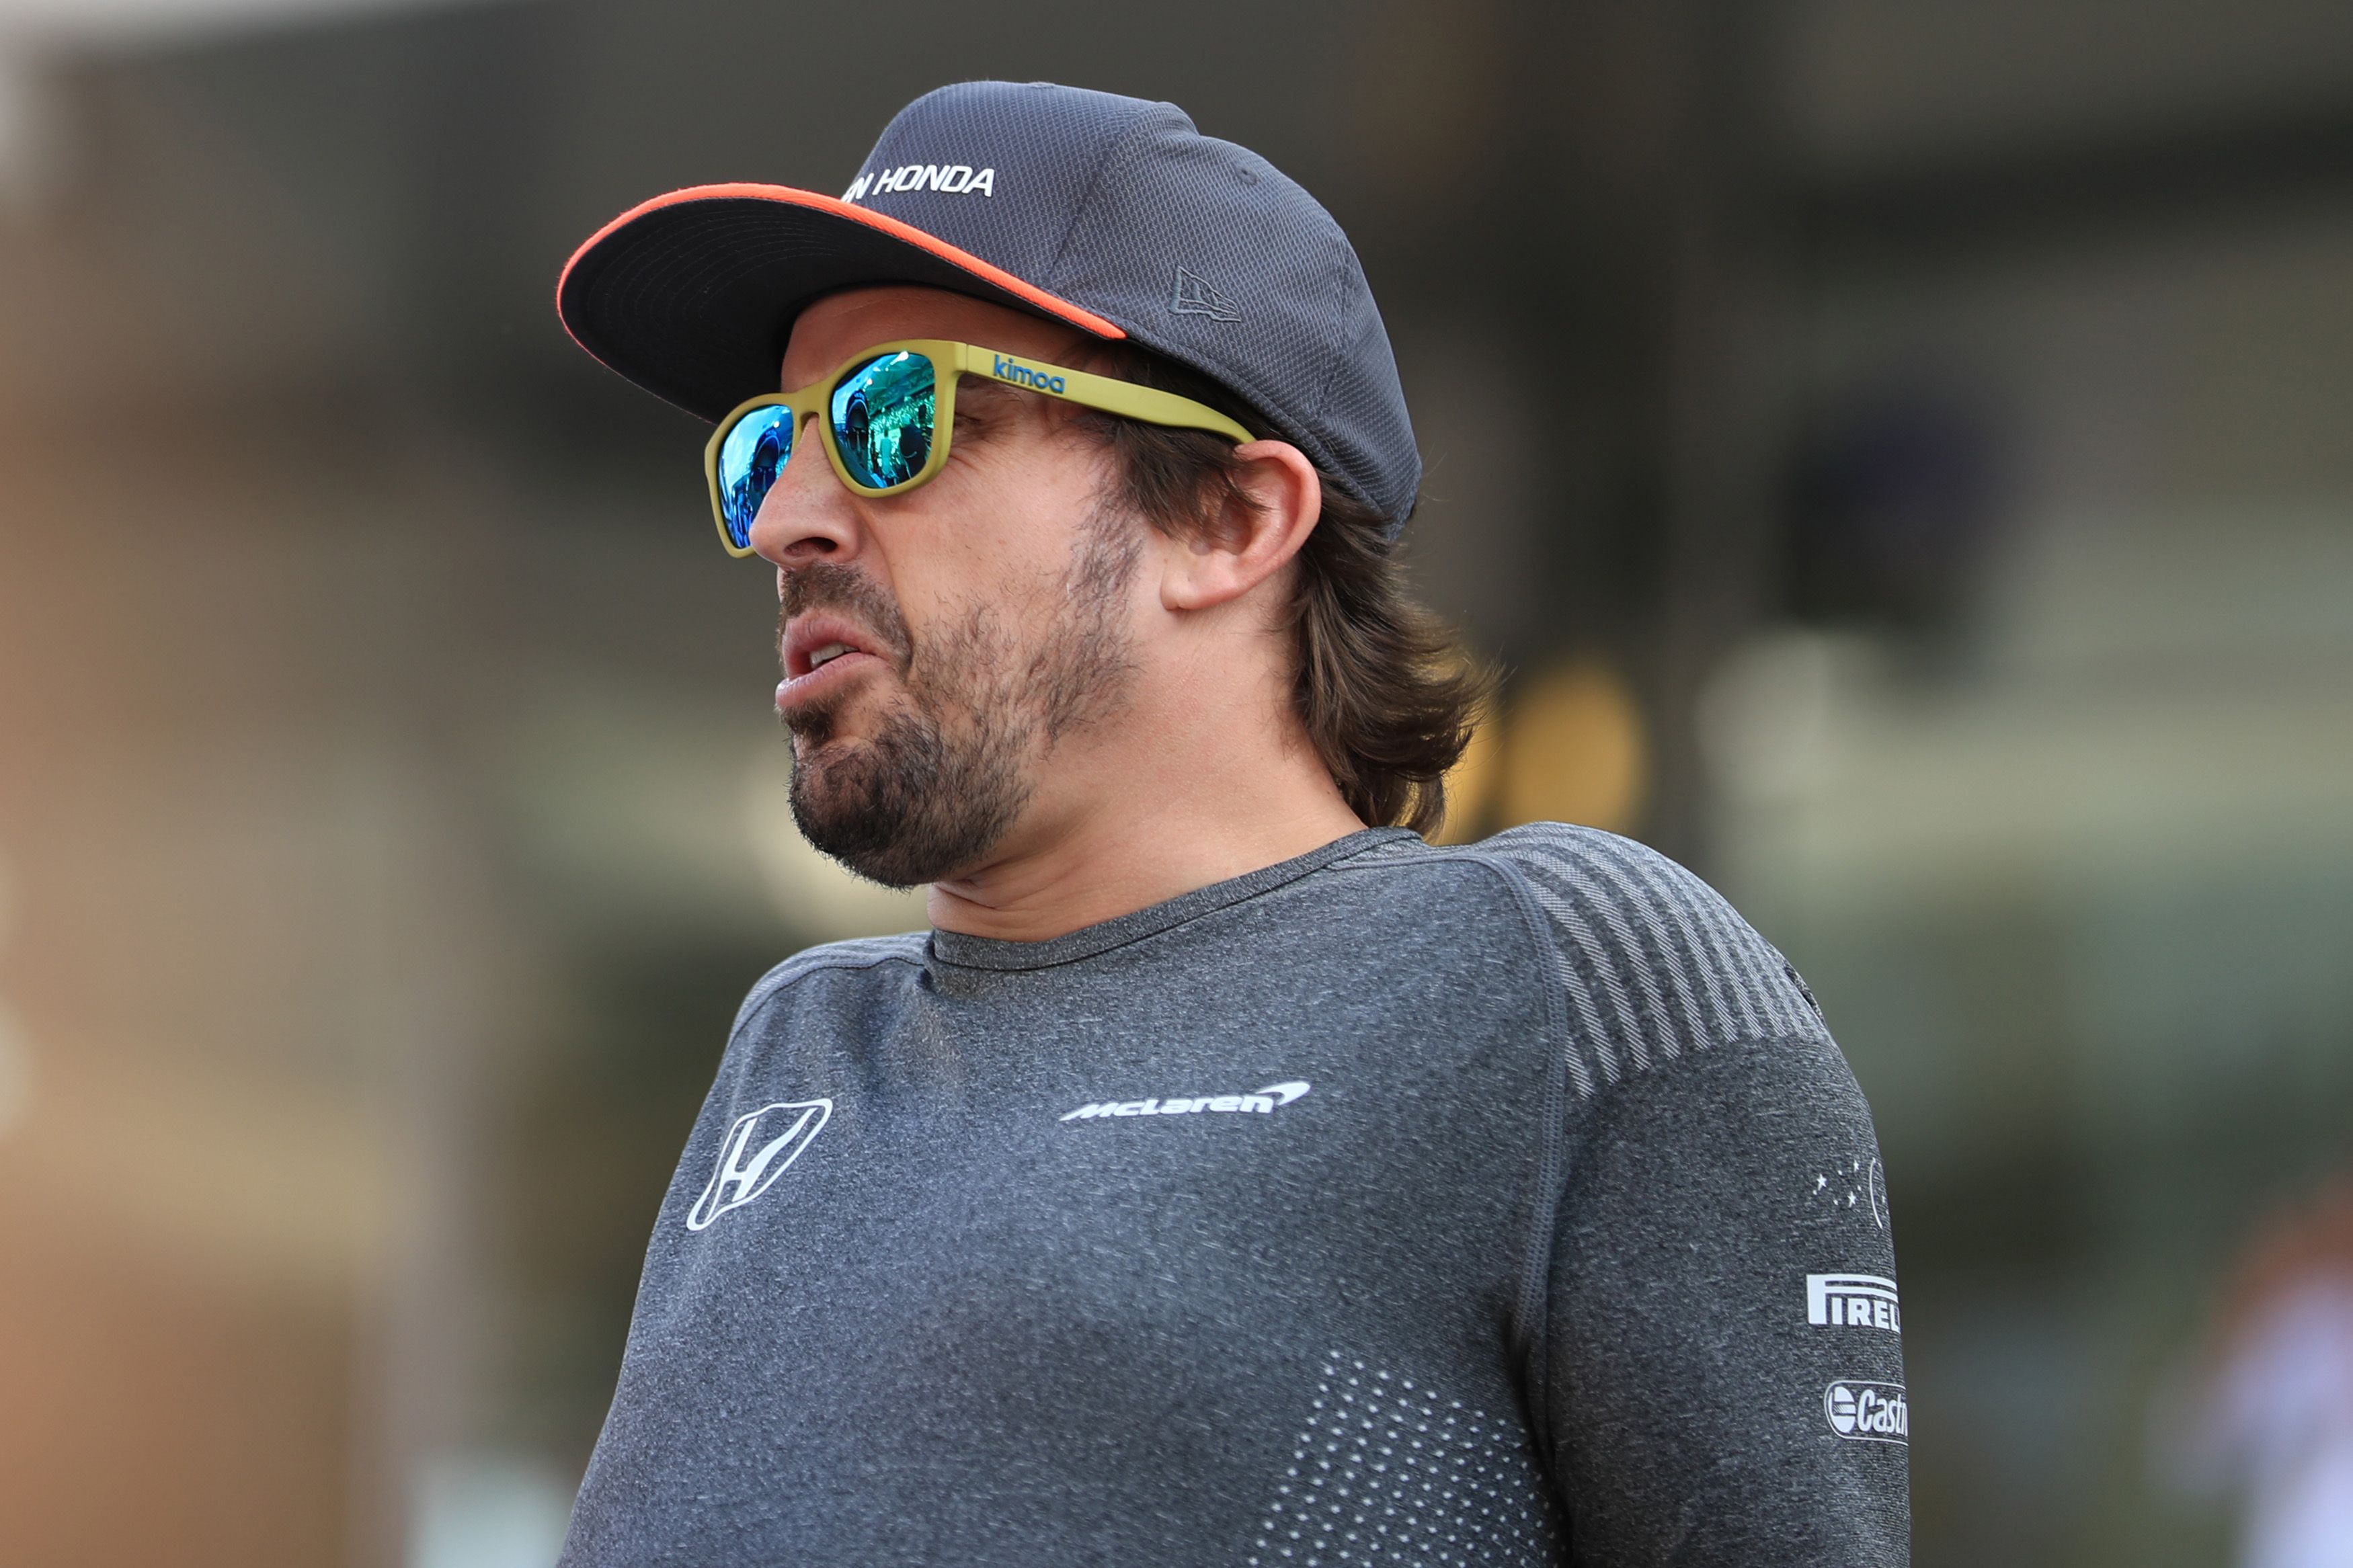 Fernando Alonso Has Heard the Rumor that He's Dating Taylor Swift ...